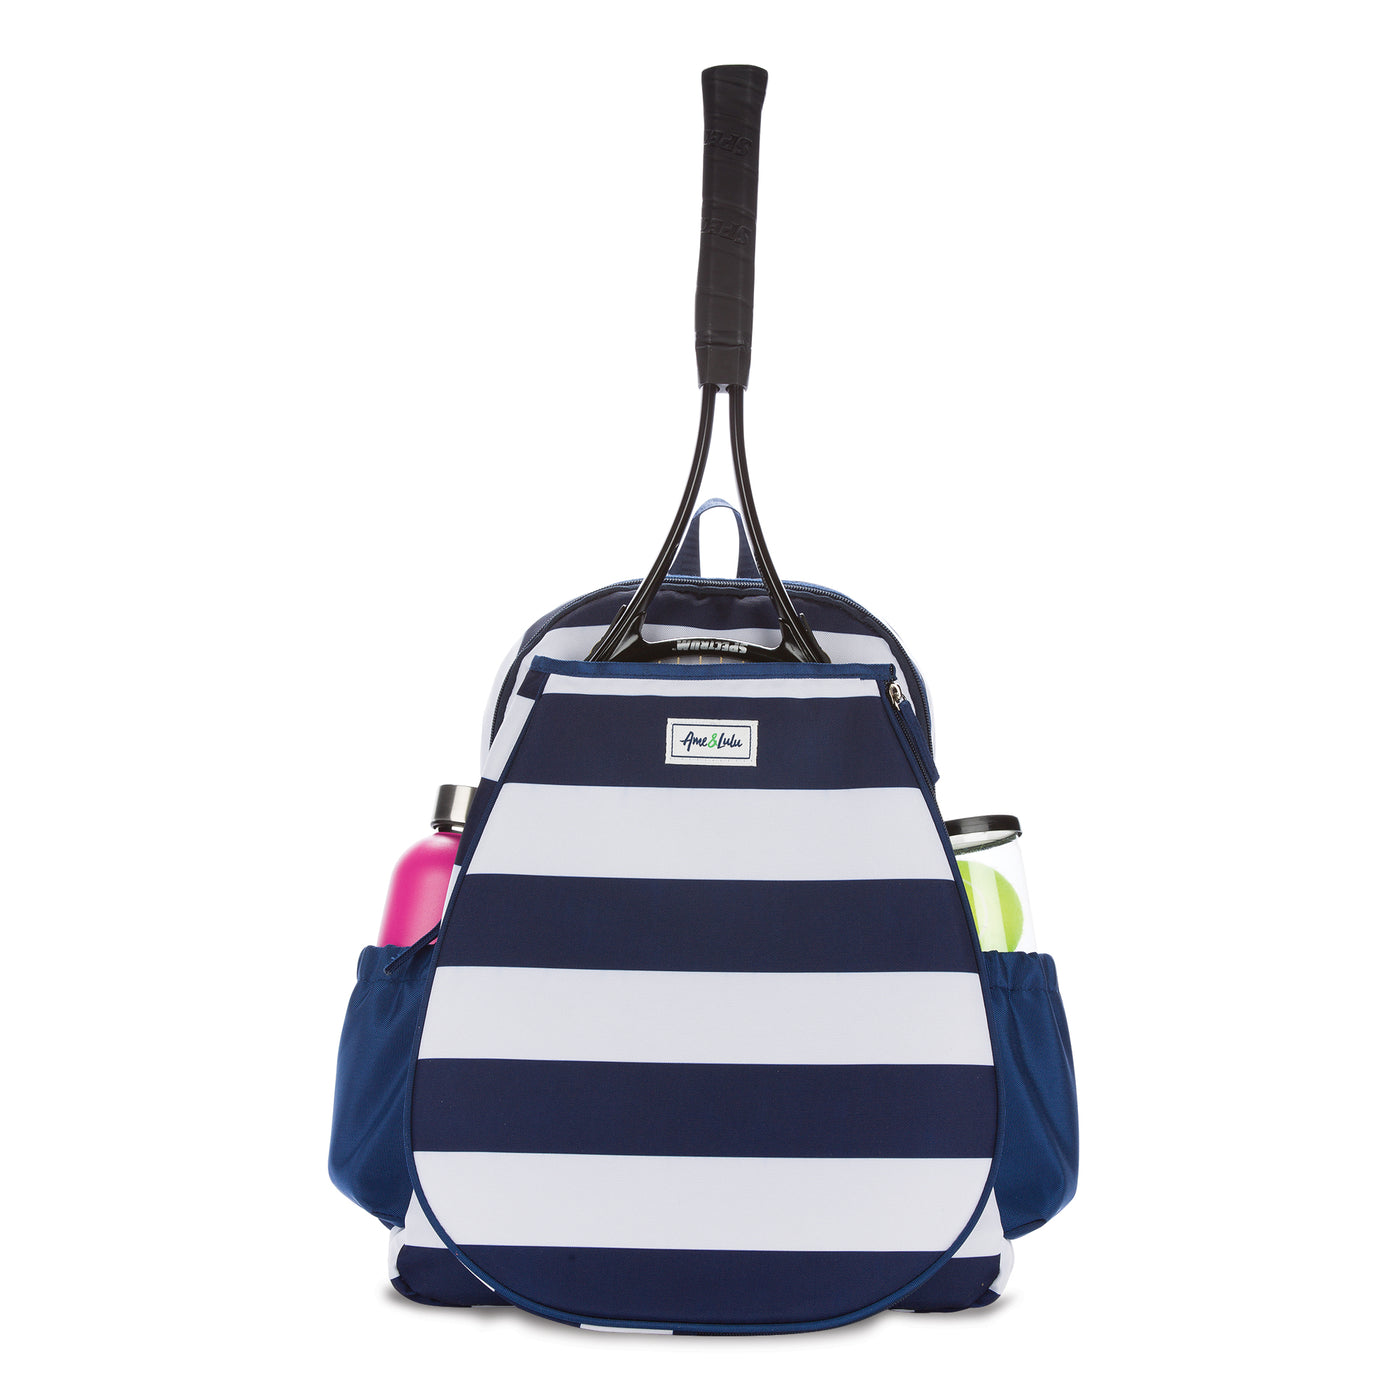 Front view of navy and white striped tennis backpack with a tennis racquet in the front pocket. There is a water bottle and tennis balls in the side pockets.